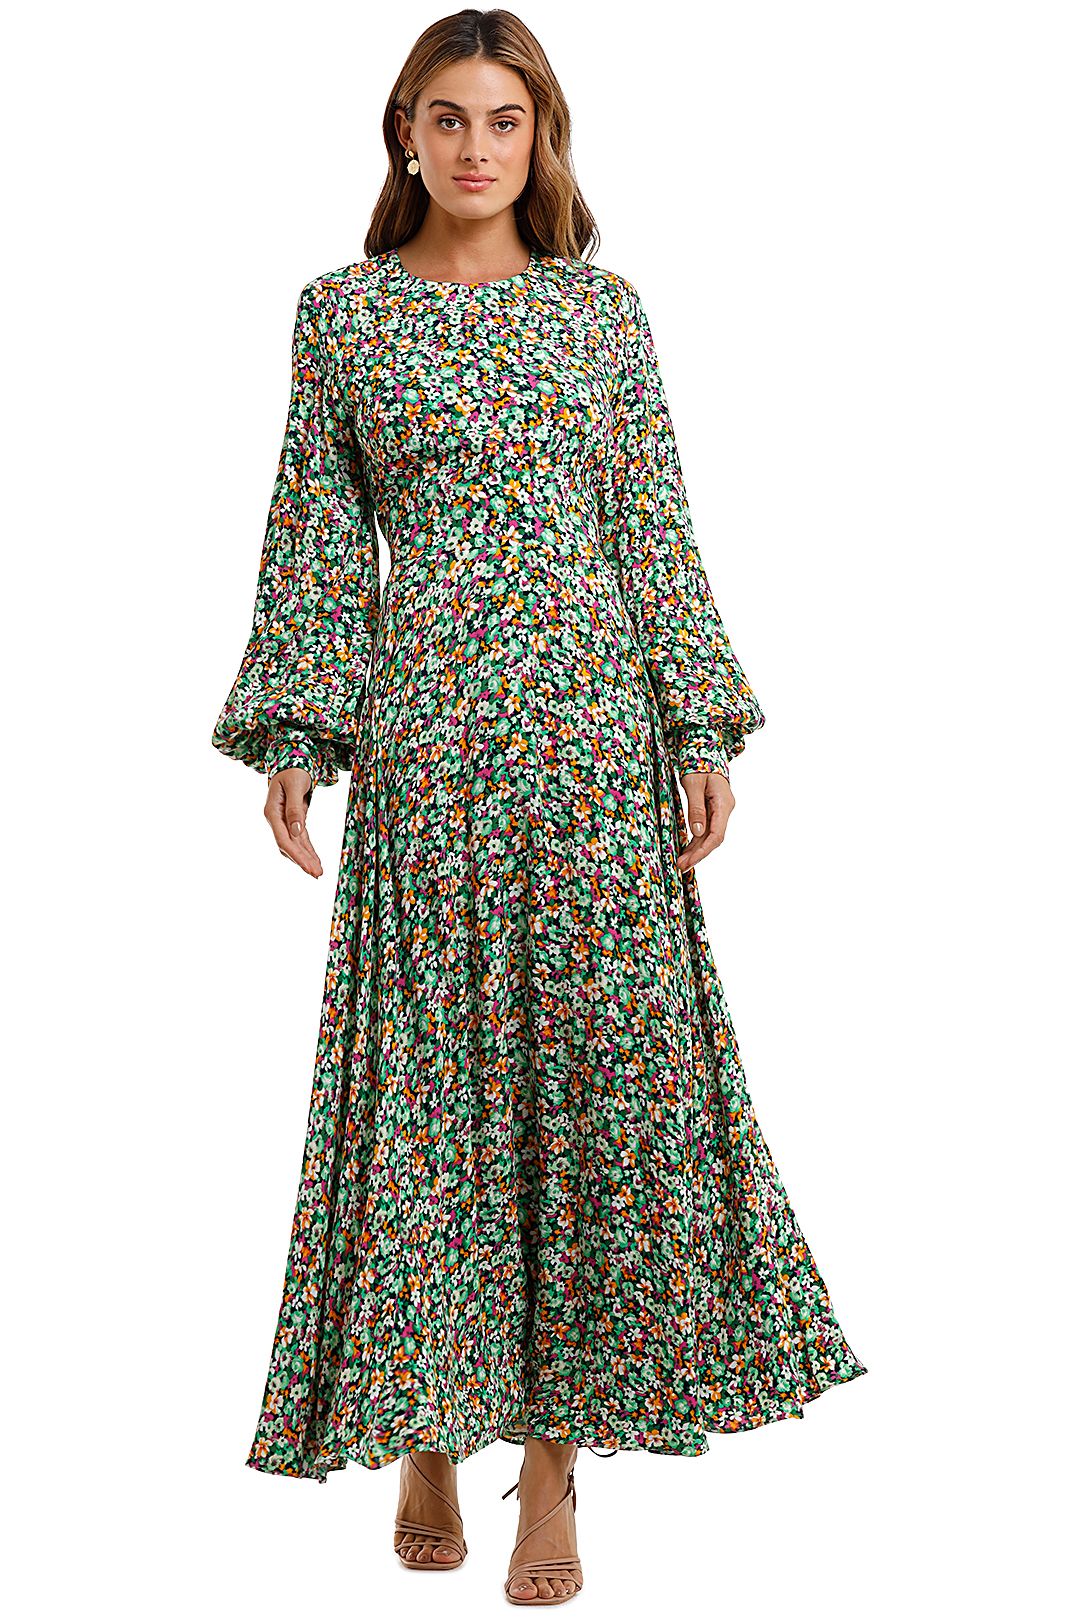 Rotate By Birger Christensen Mary Long Sleeve Dress Floral